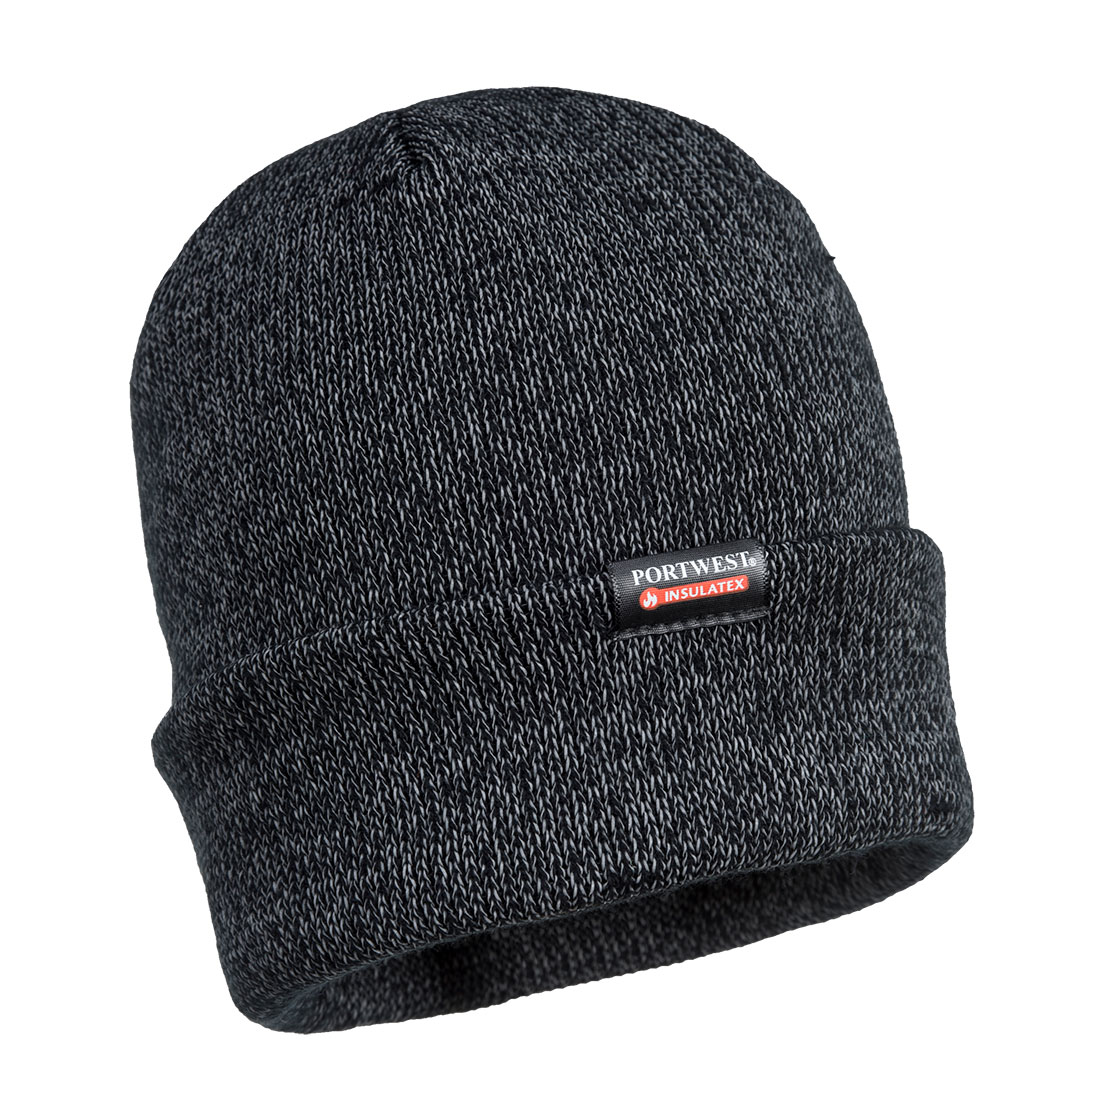 Reflective Knit Hat, Insulatex Lined Size  Black